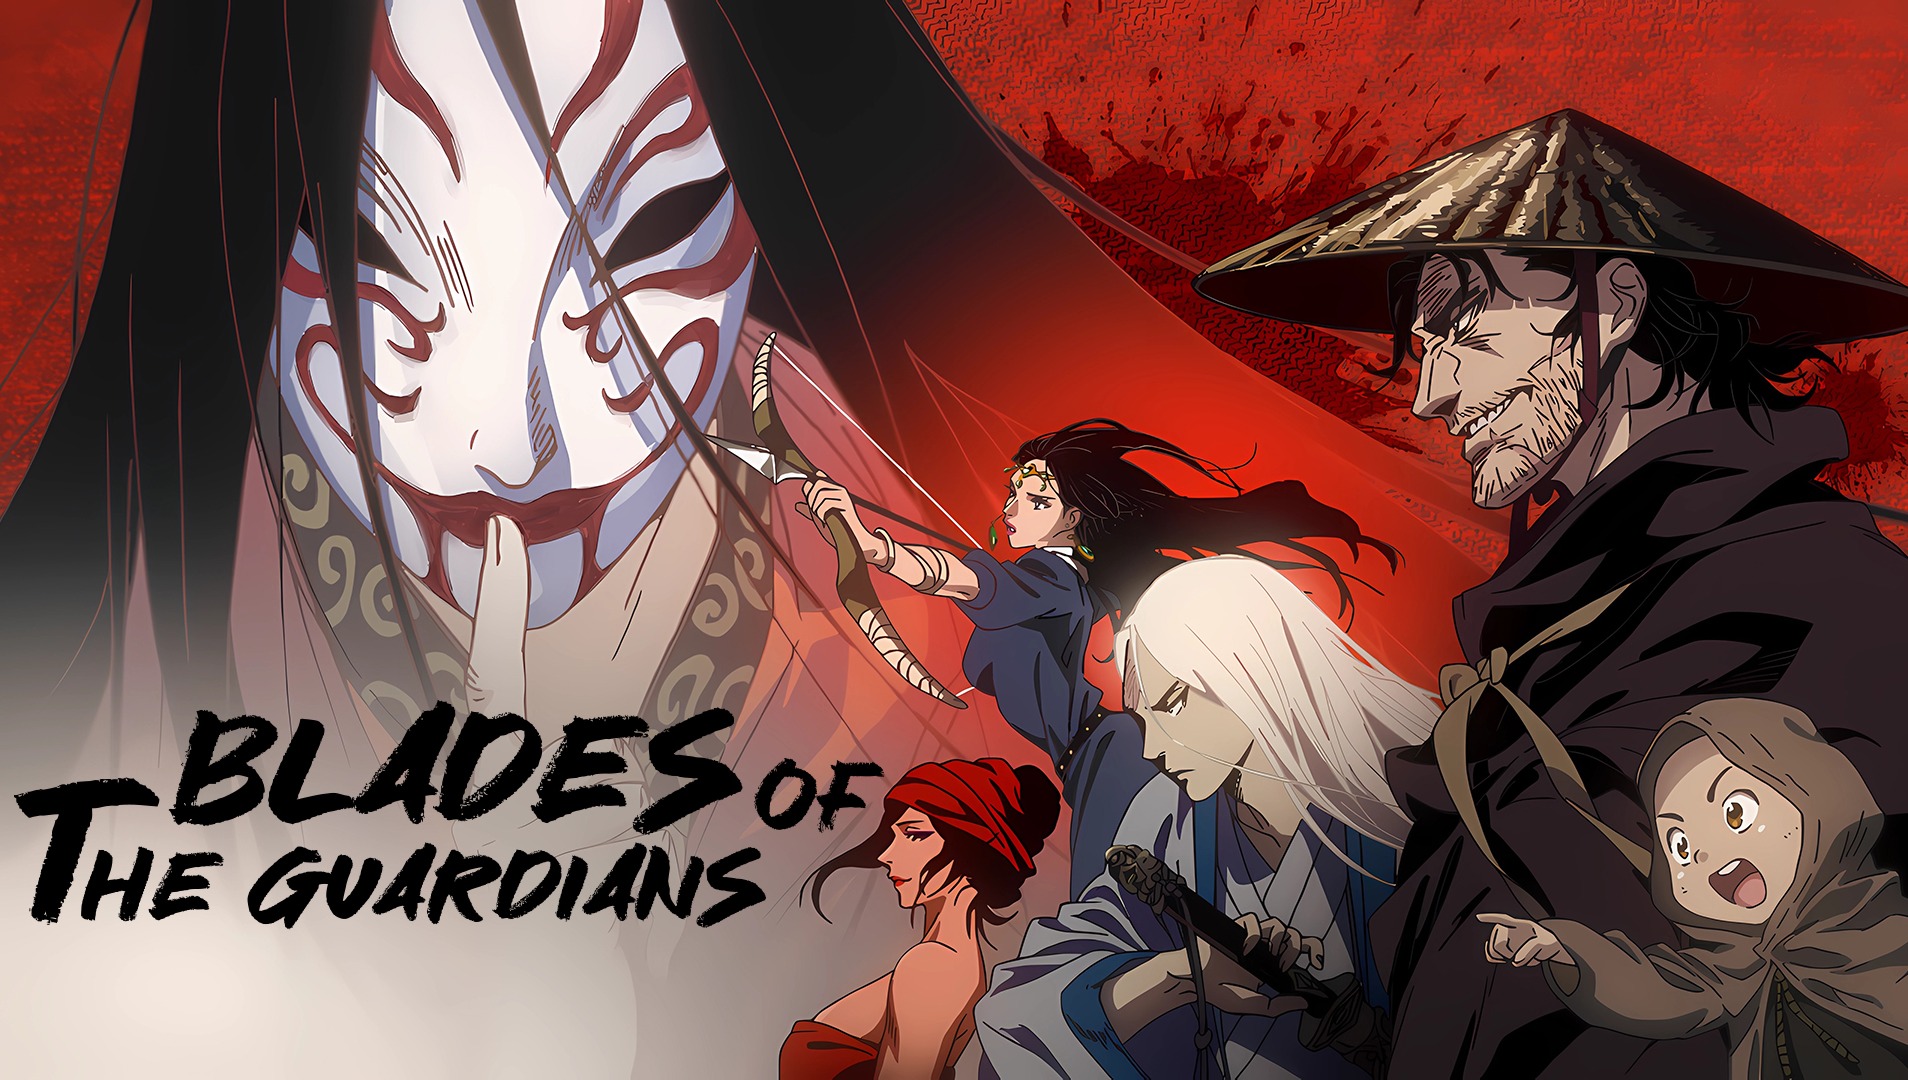 EP1: Blades of the Guardians - Watch HD Video Online - WeTV